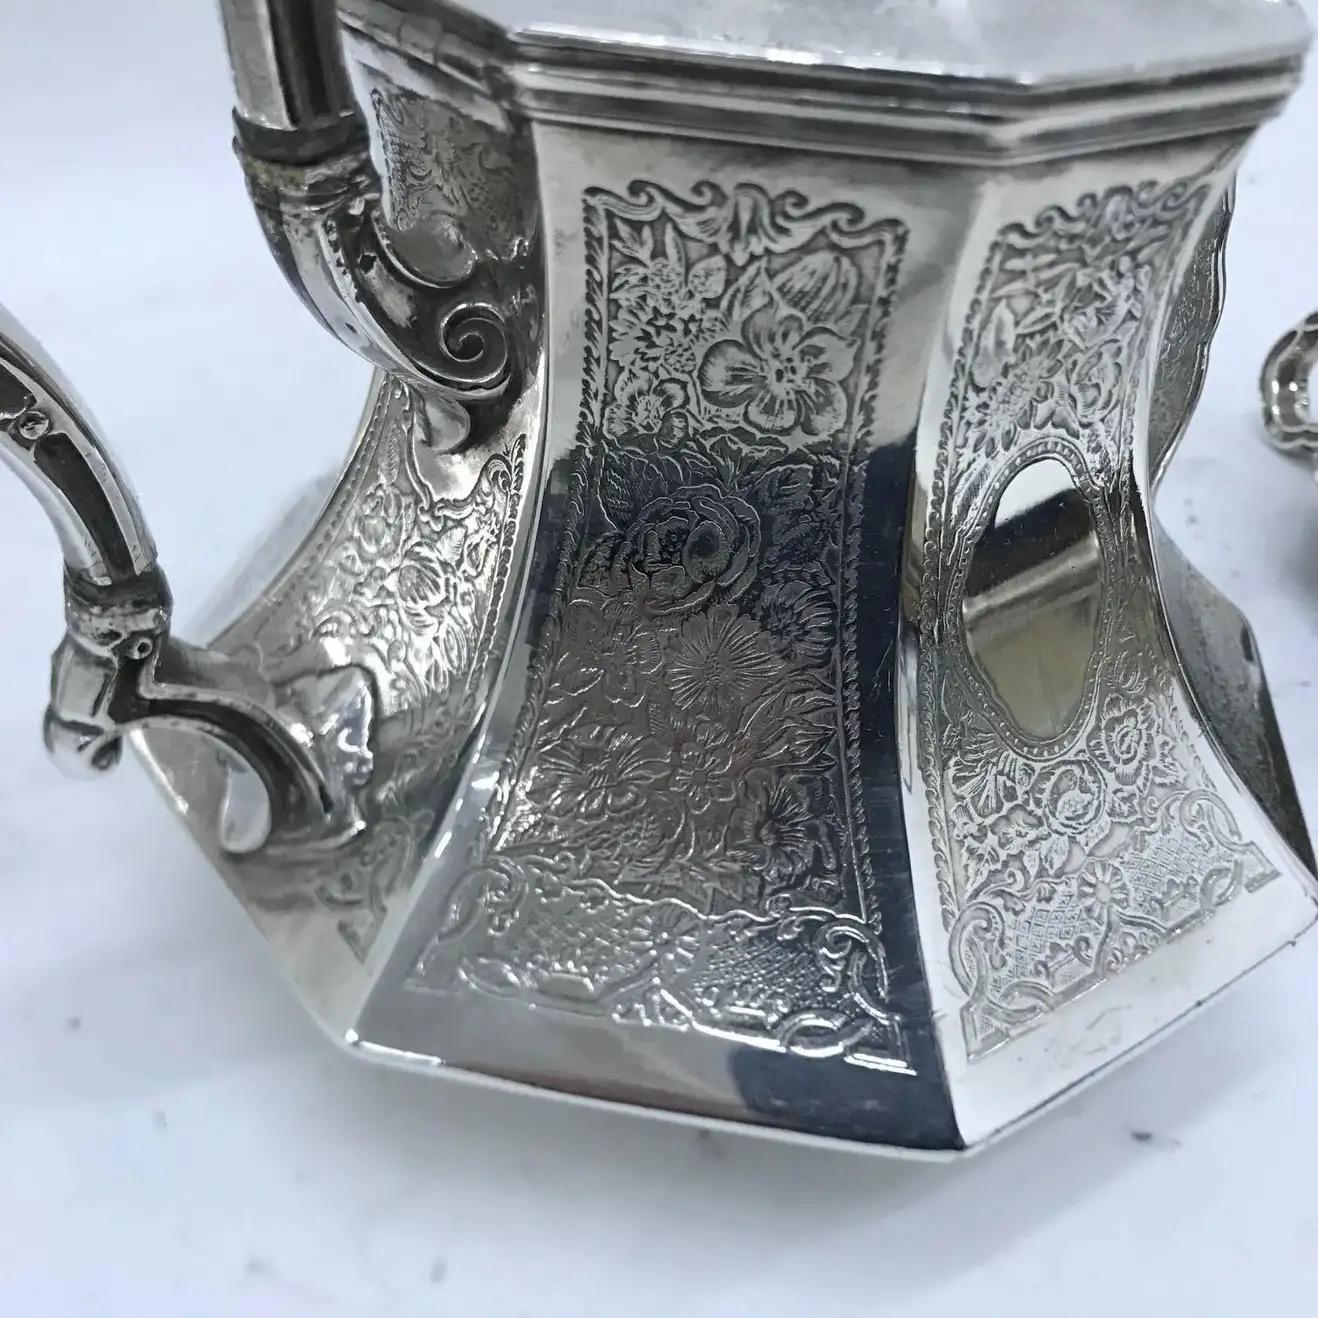 1890 Skinner & Co. Art Nouveau Engraved Silver plated English Tea Service For Sale 2